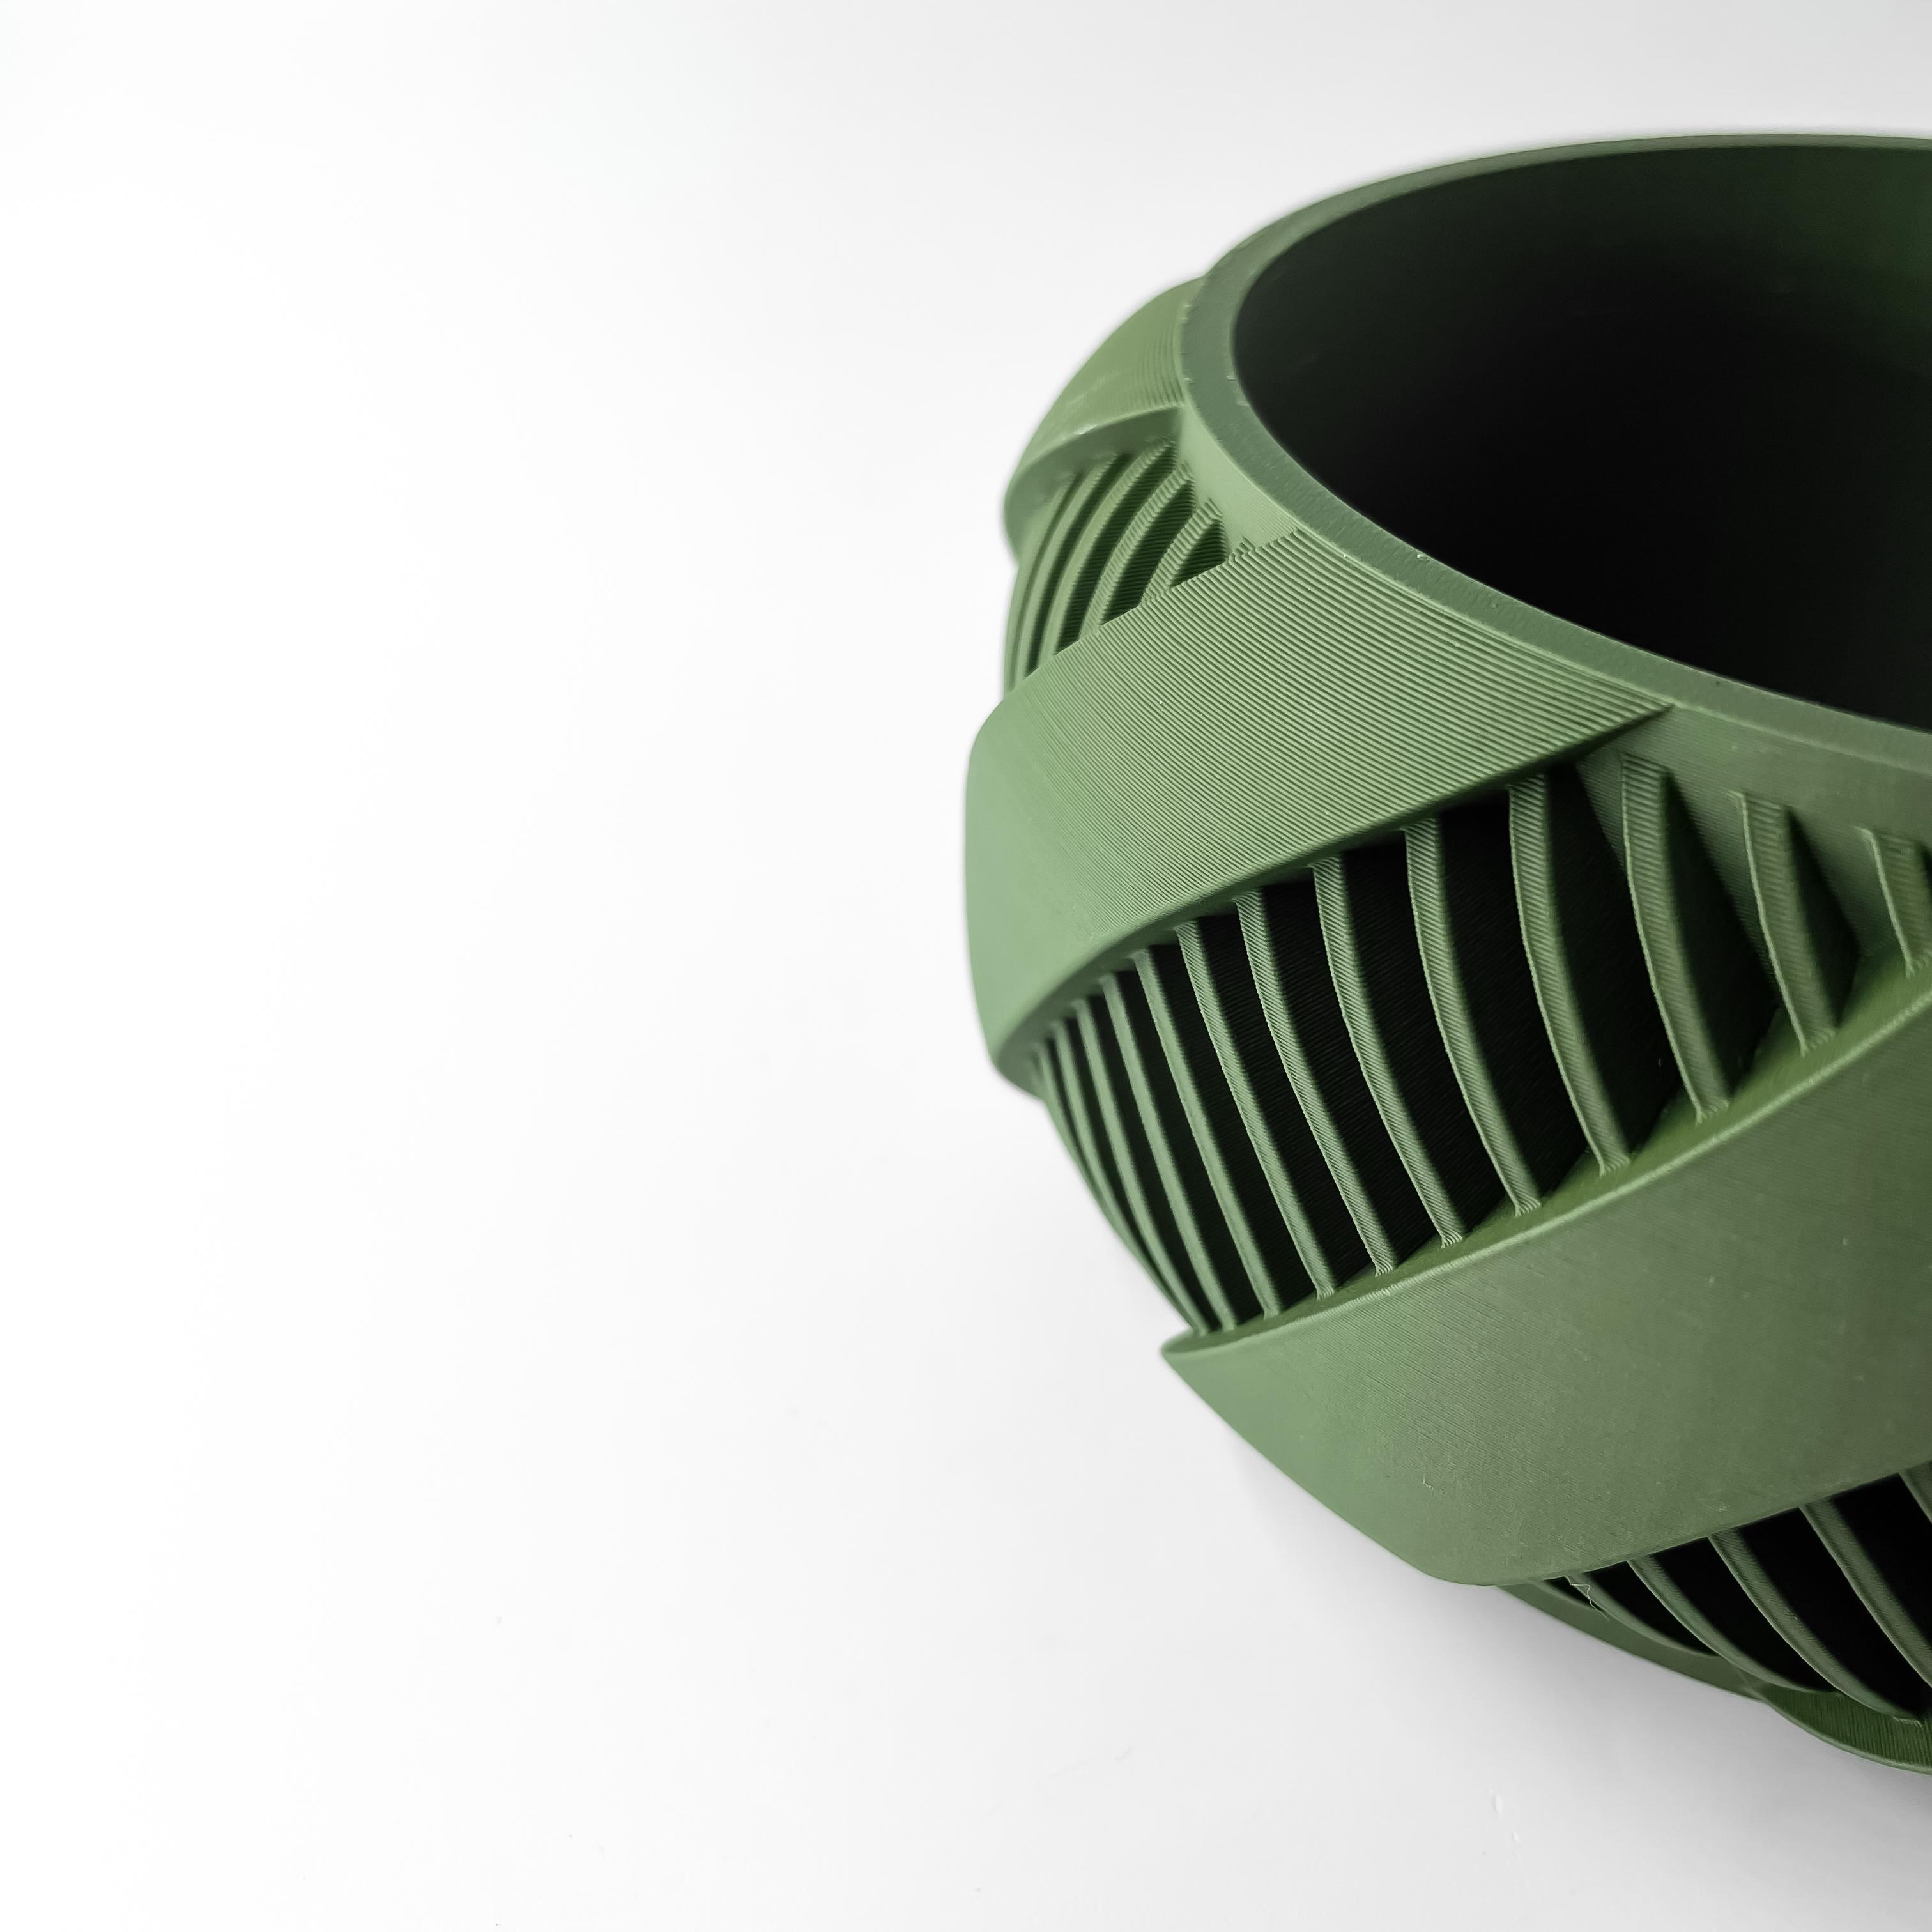 The Brimo Planter Pot with Drainage Tray & Stand Included | Modern and Unique Home Decor 3d model